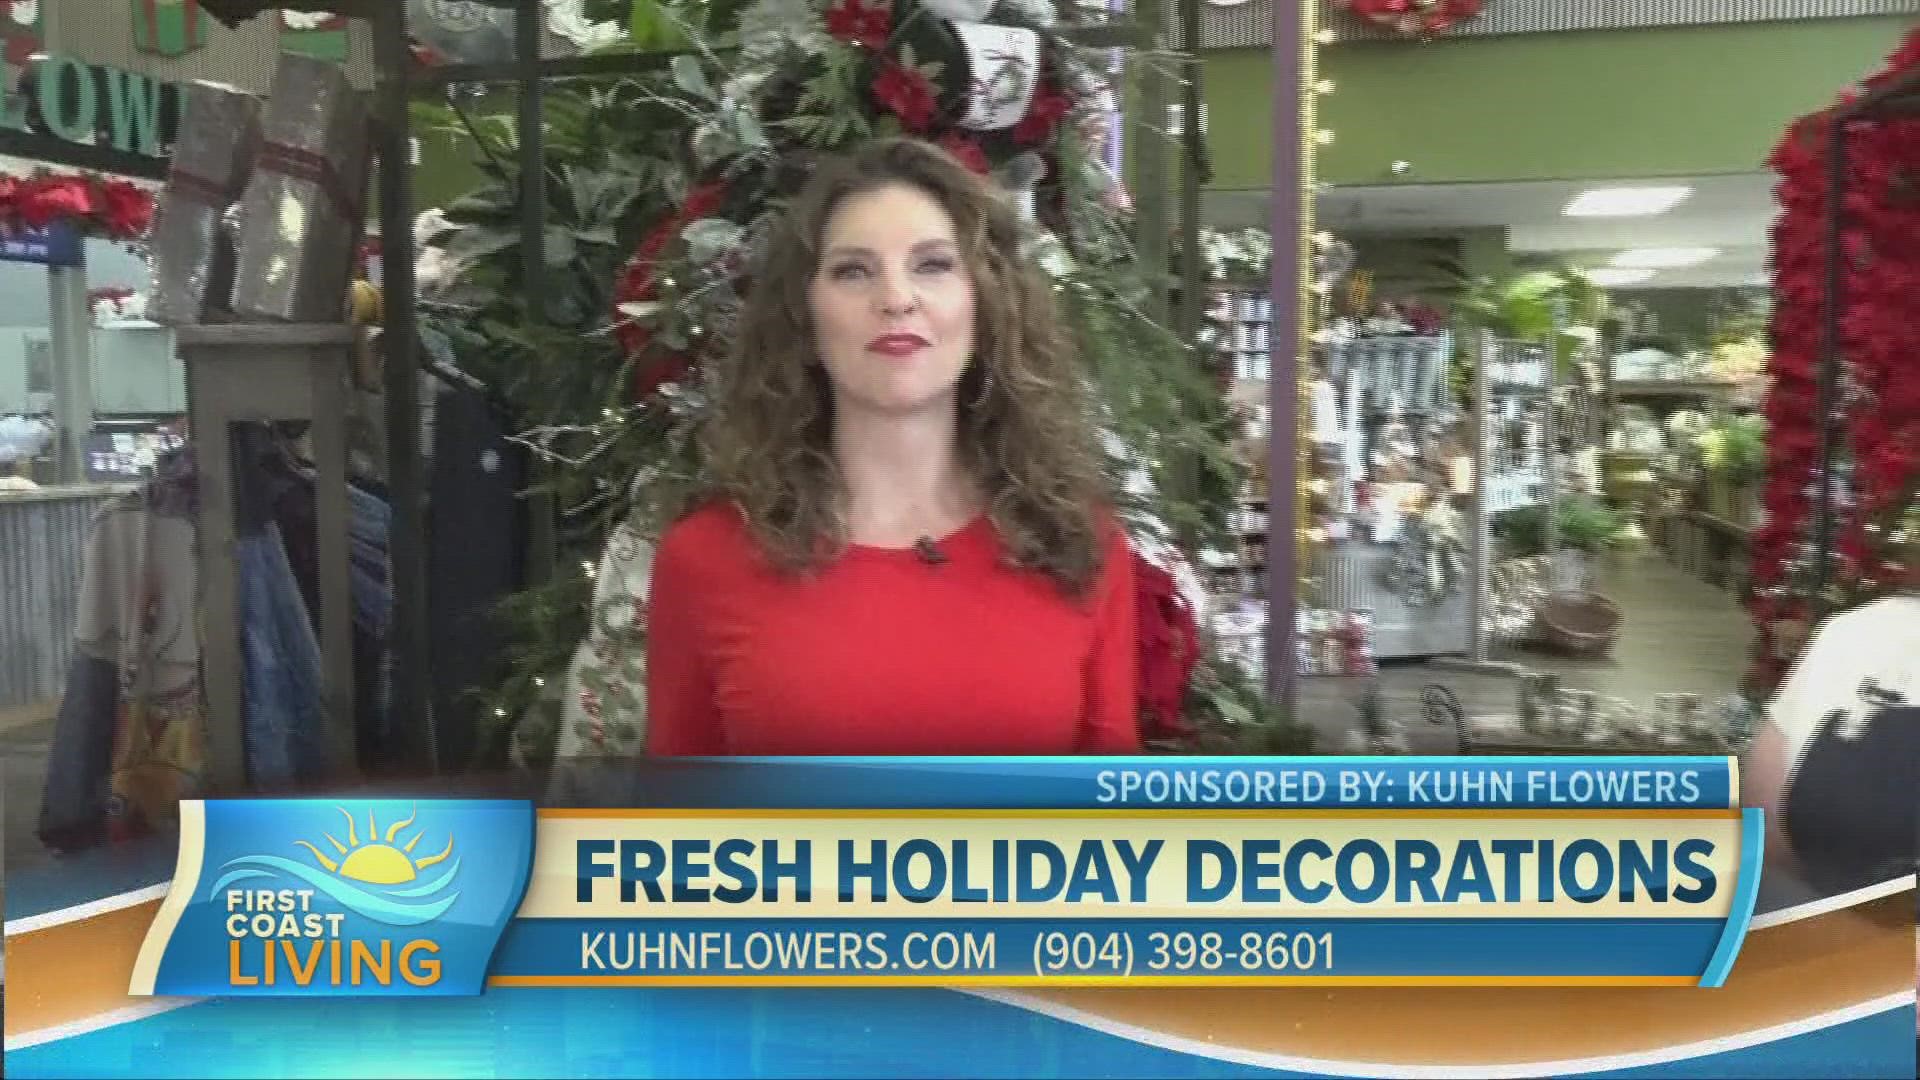 Kuhn Flowers have been creating memories in Jacksonville and surrounding areas since 1947. Stop by to grab your holiday décor!